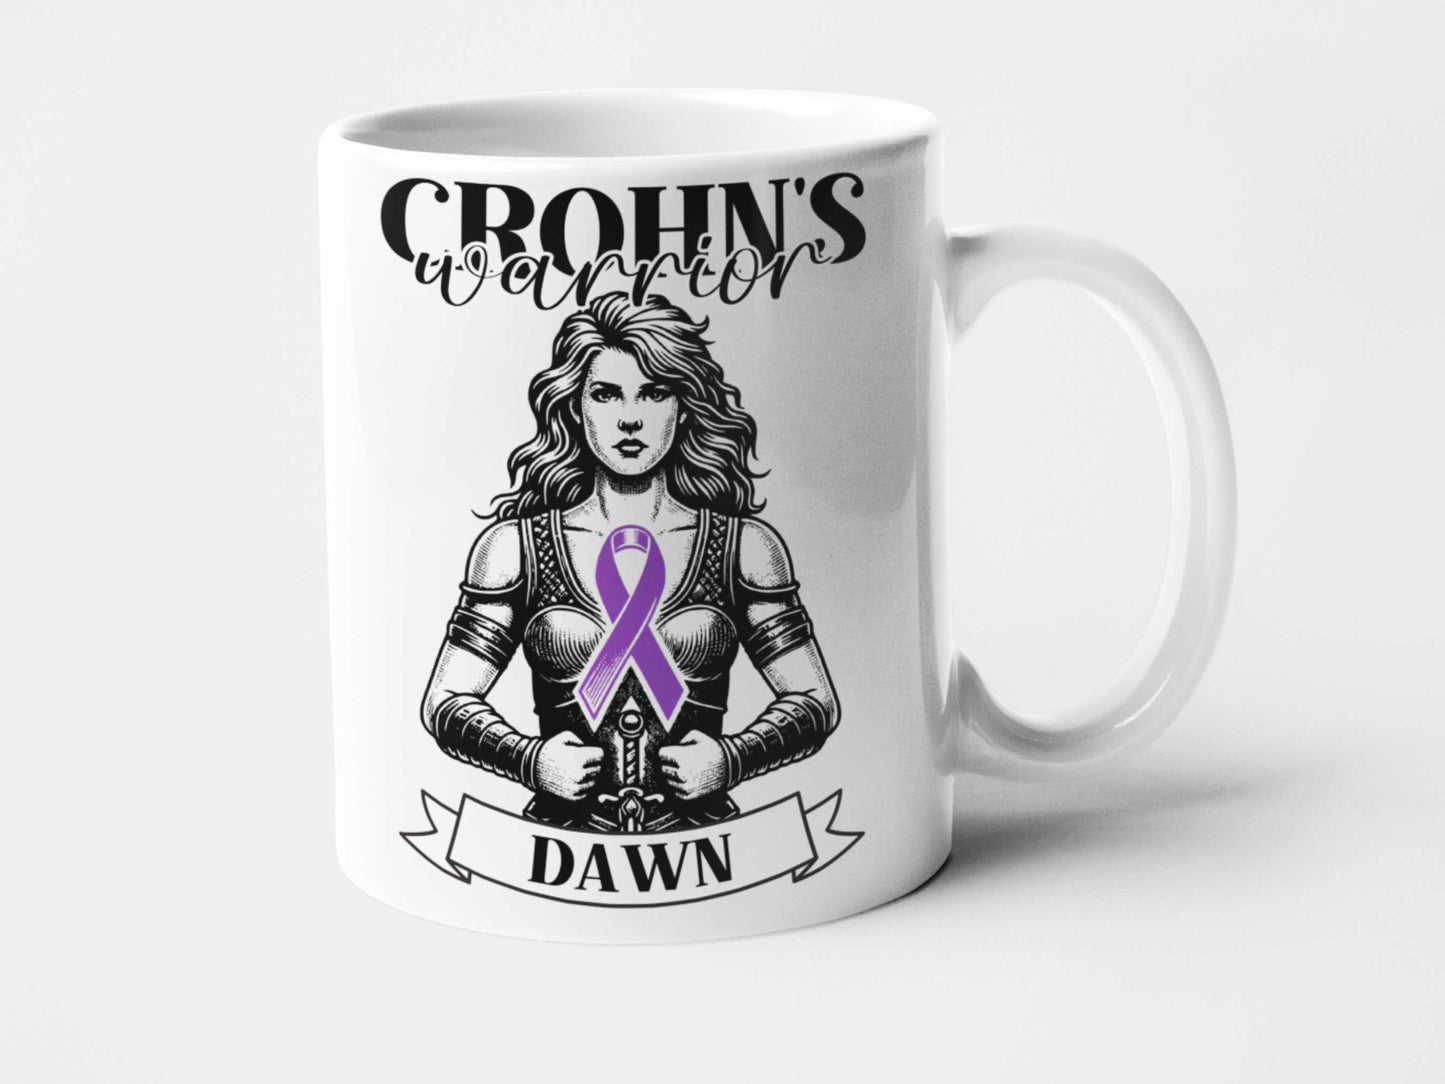 Crohn's Warrior Personalised Mug - A Heartfelt Christmas, Mother's Day, Birthday Gift for Mum, Daughter, Sister, Nan, Auntie & Friends, Celebrating Strength and Awareness